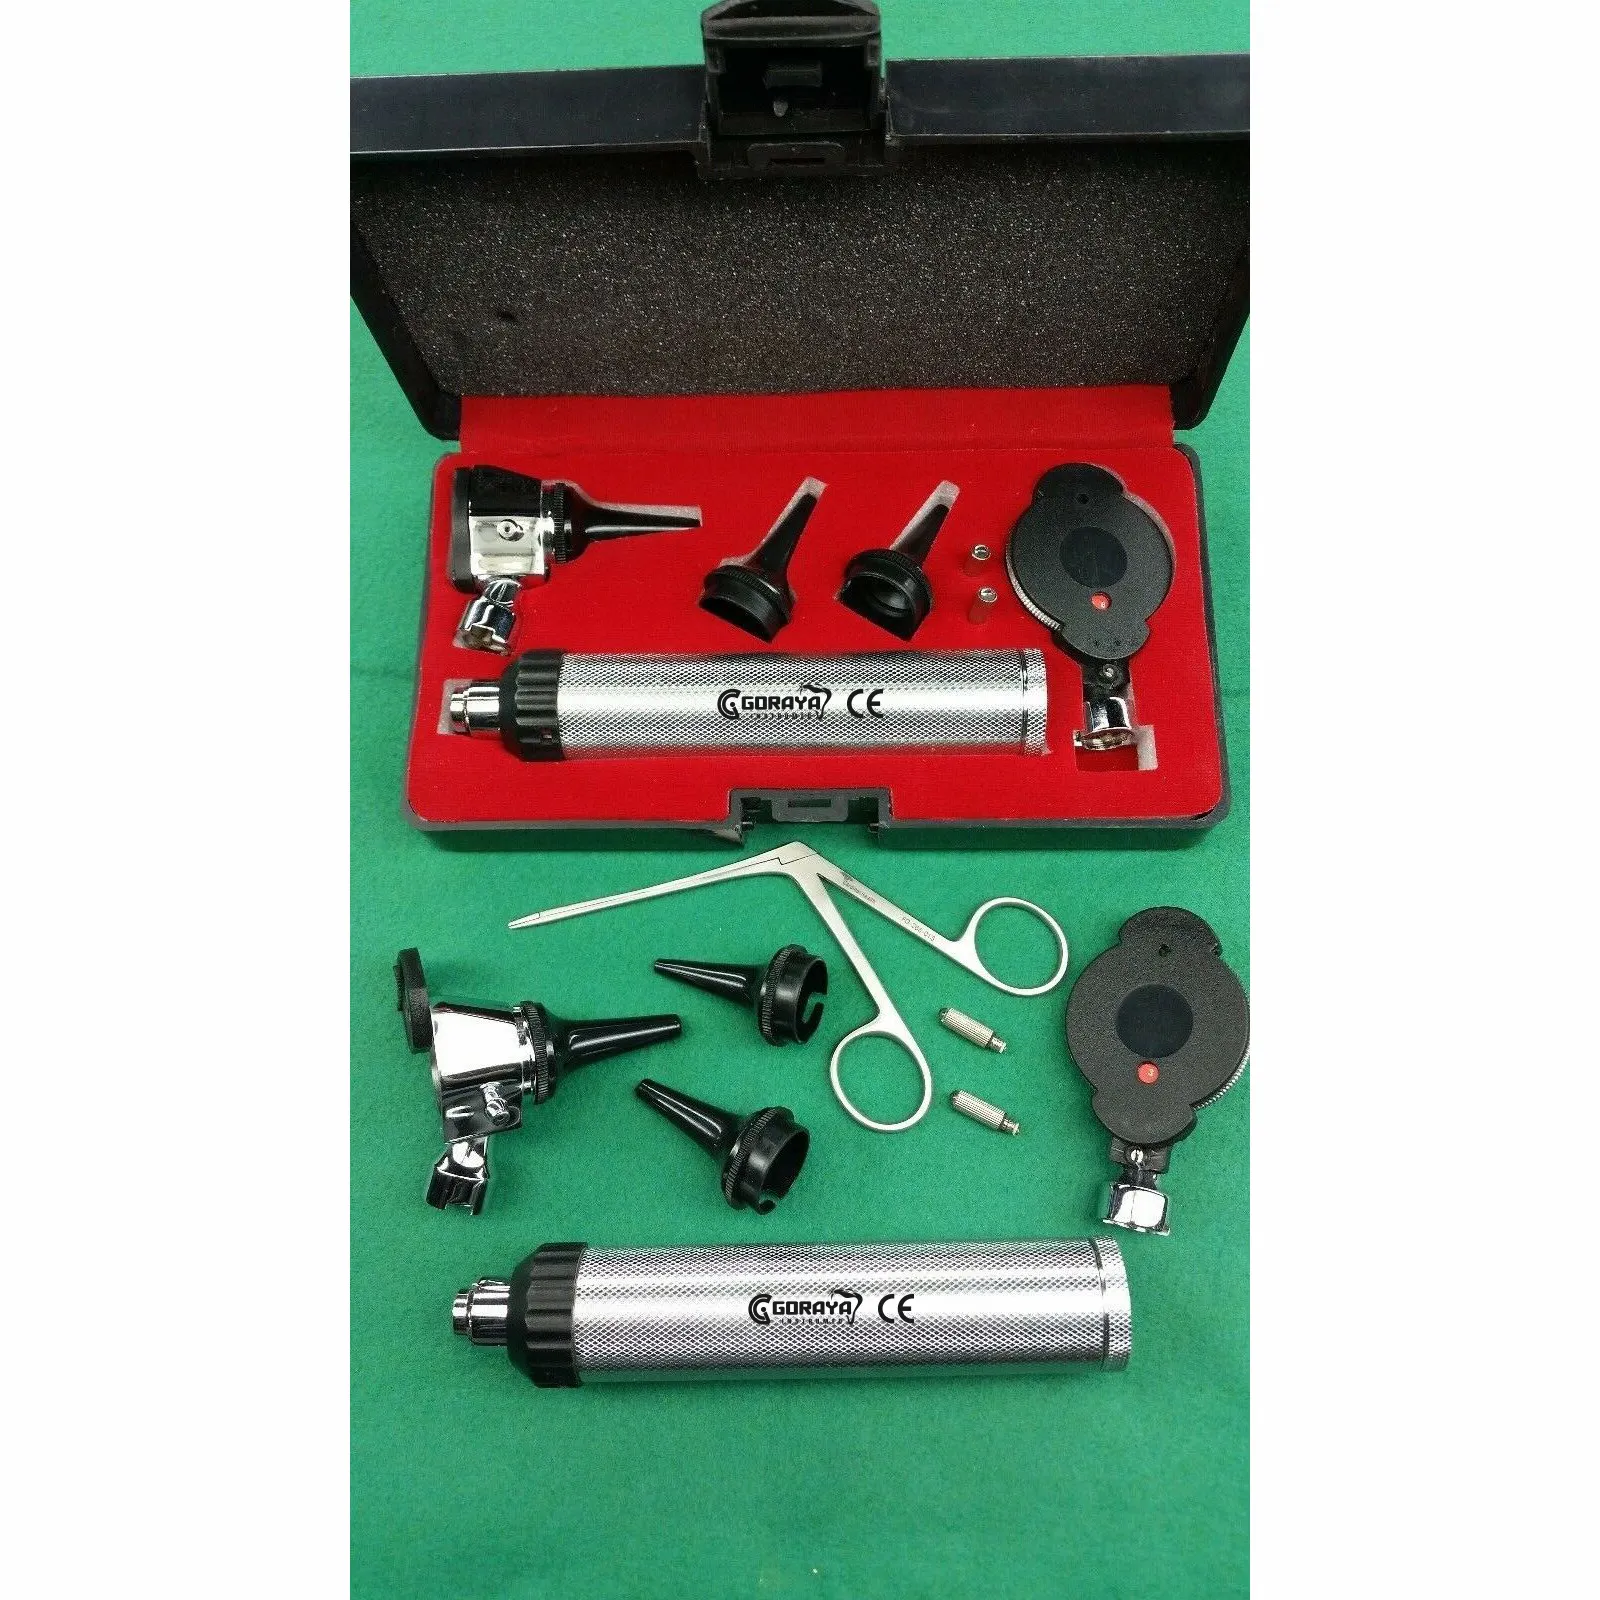 HOT SALE GORAYA GERMAN NEW Professional OPHTHALMOSCOPE OTOSCOPE DIAGNOSTIC SET + 2 BULB + 1 ALLIGATOR CE ISO APPROVED